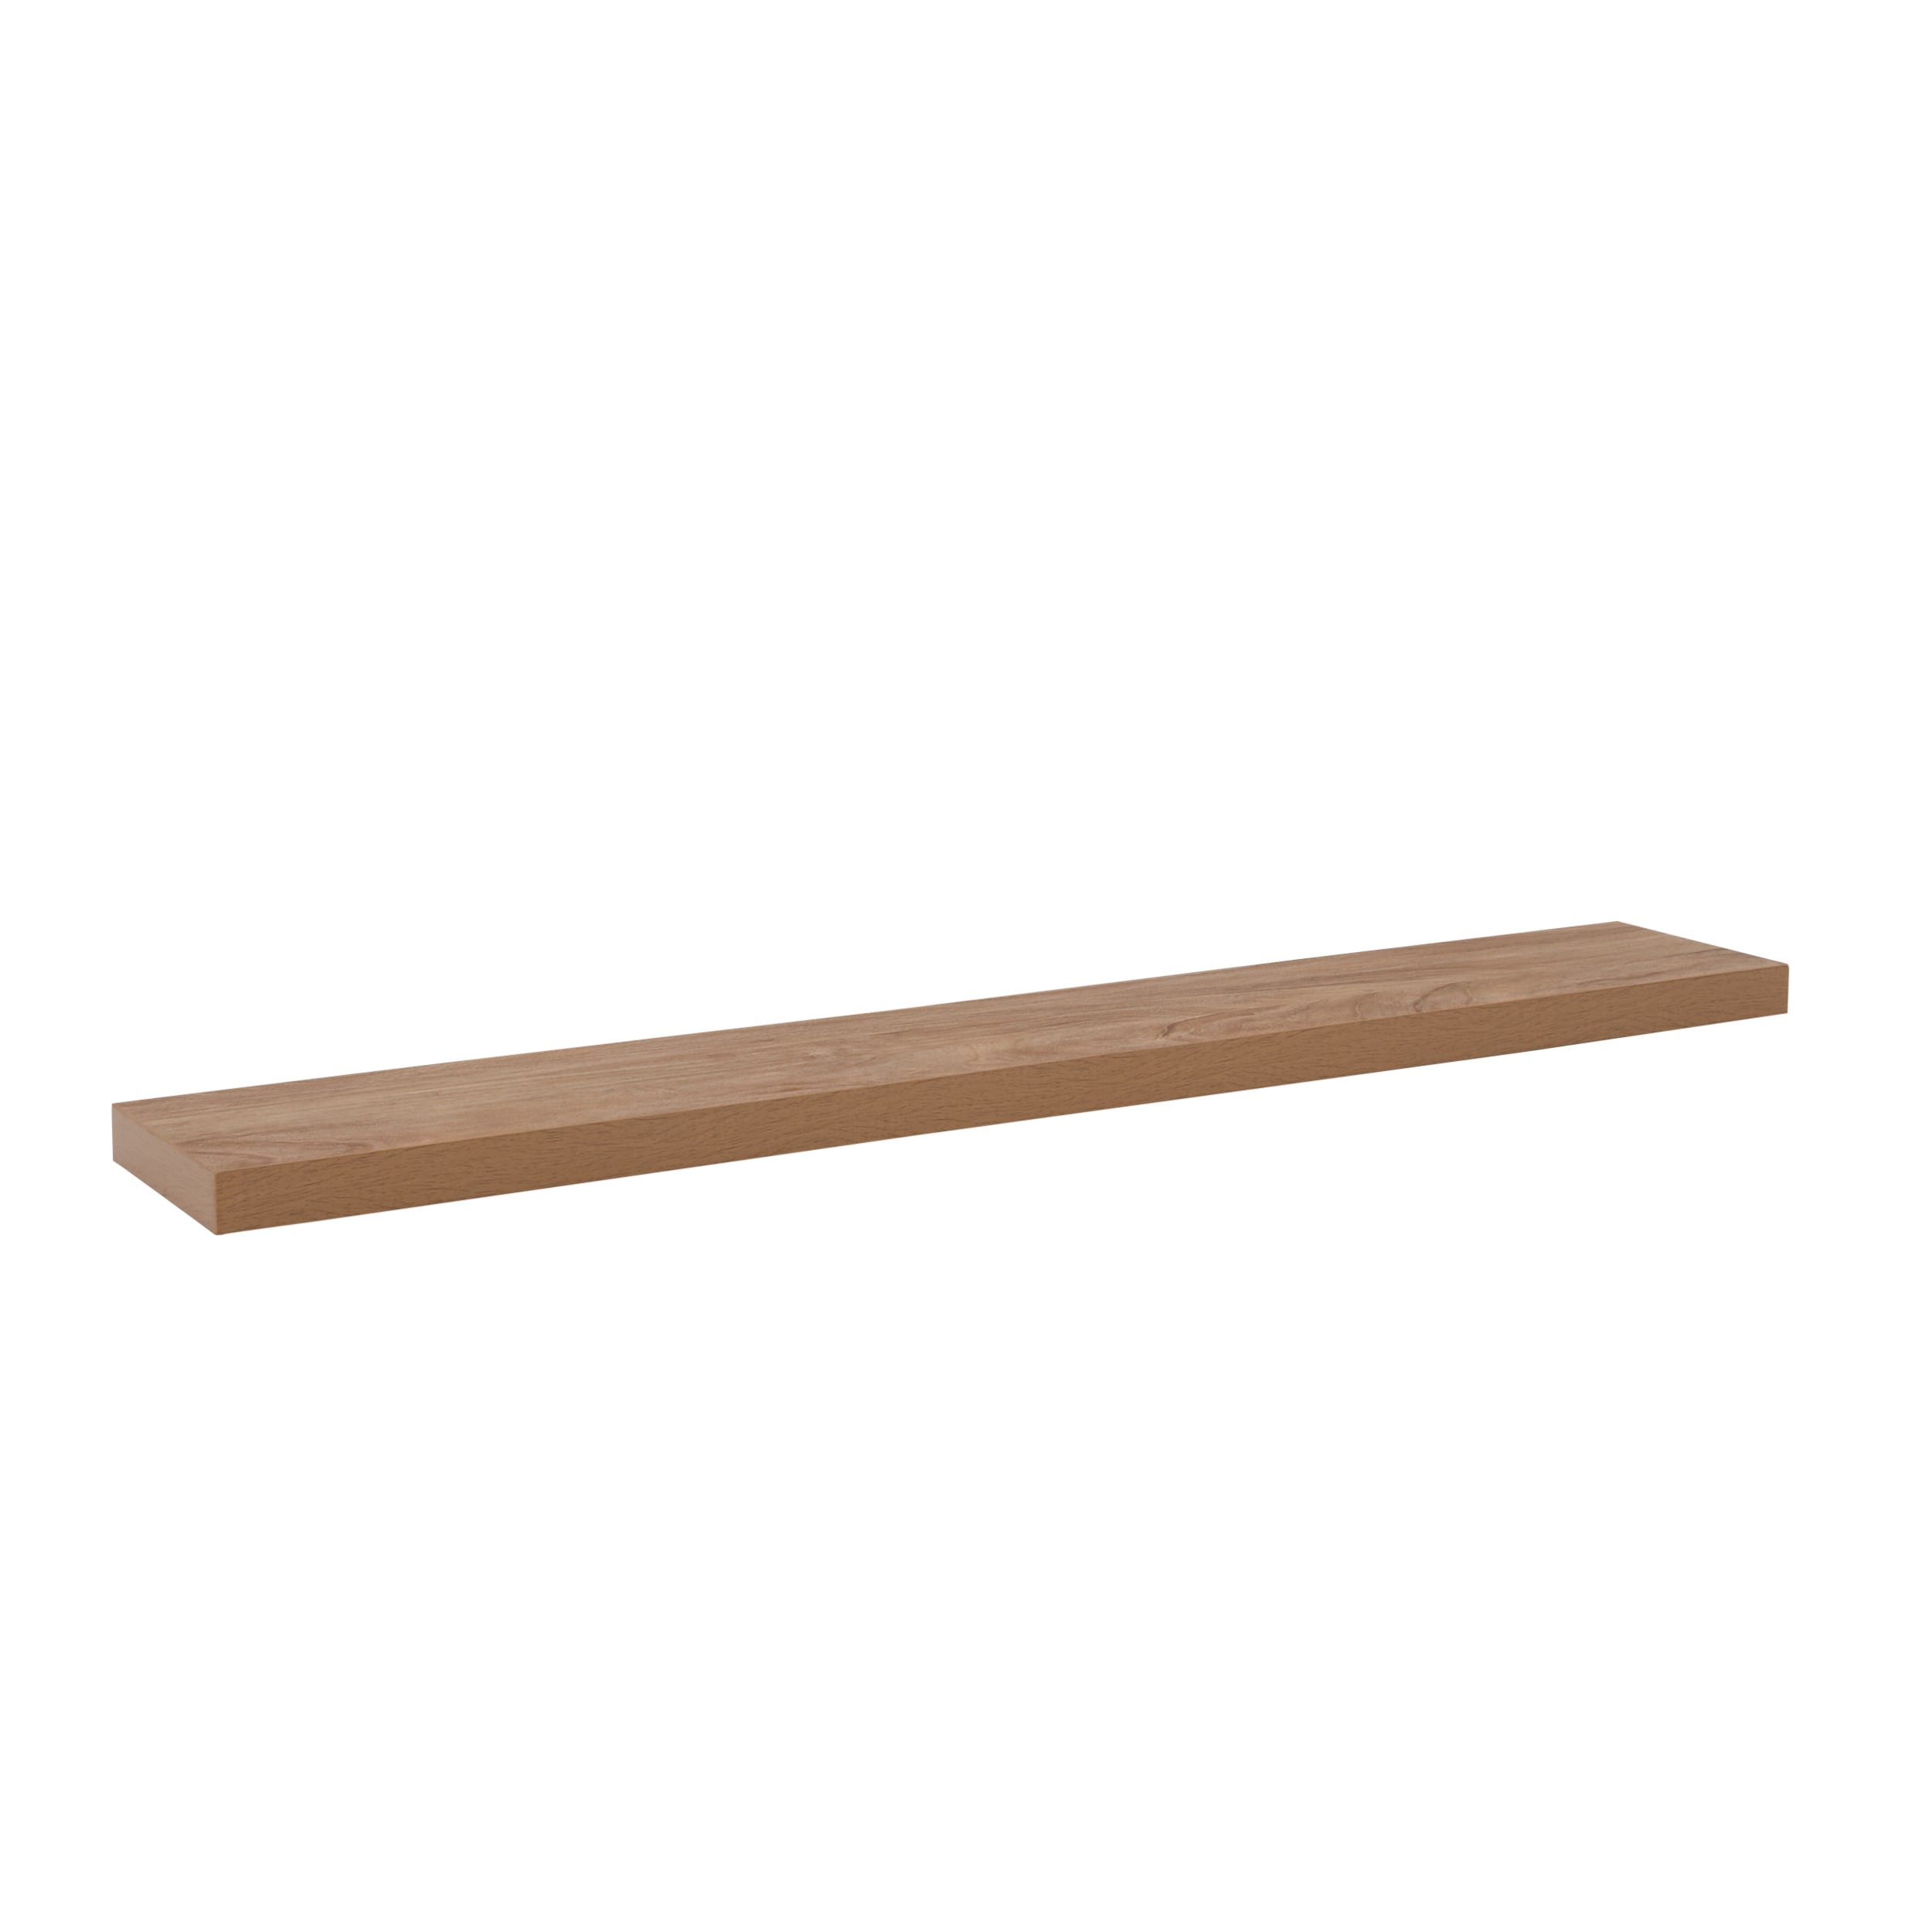 1 Real Wood Floating Shelves - Made in the USA